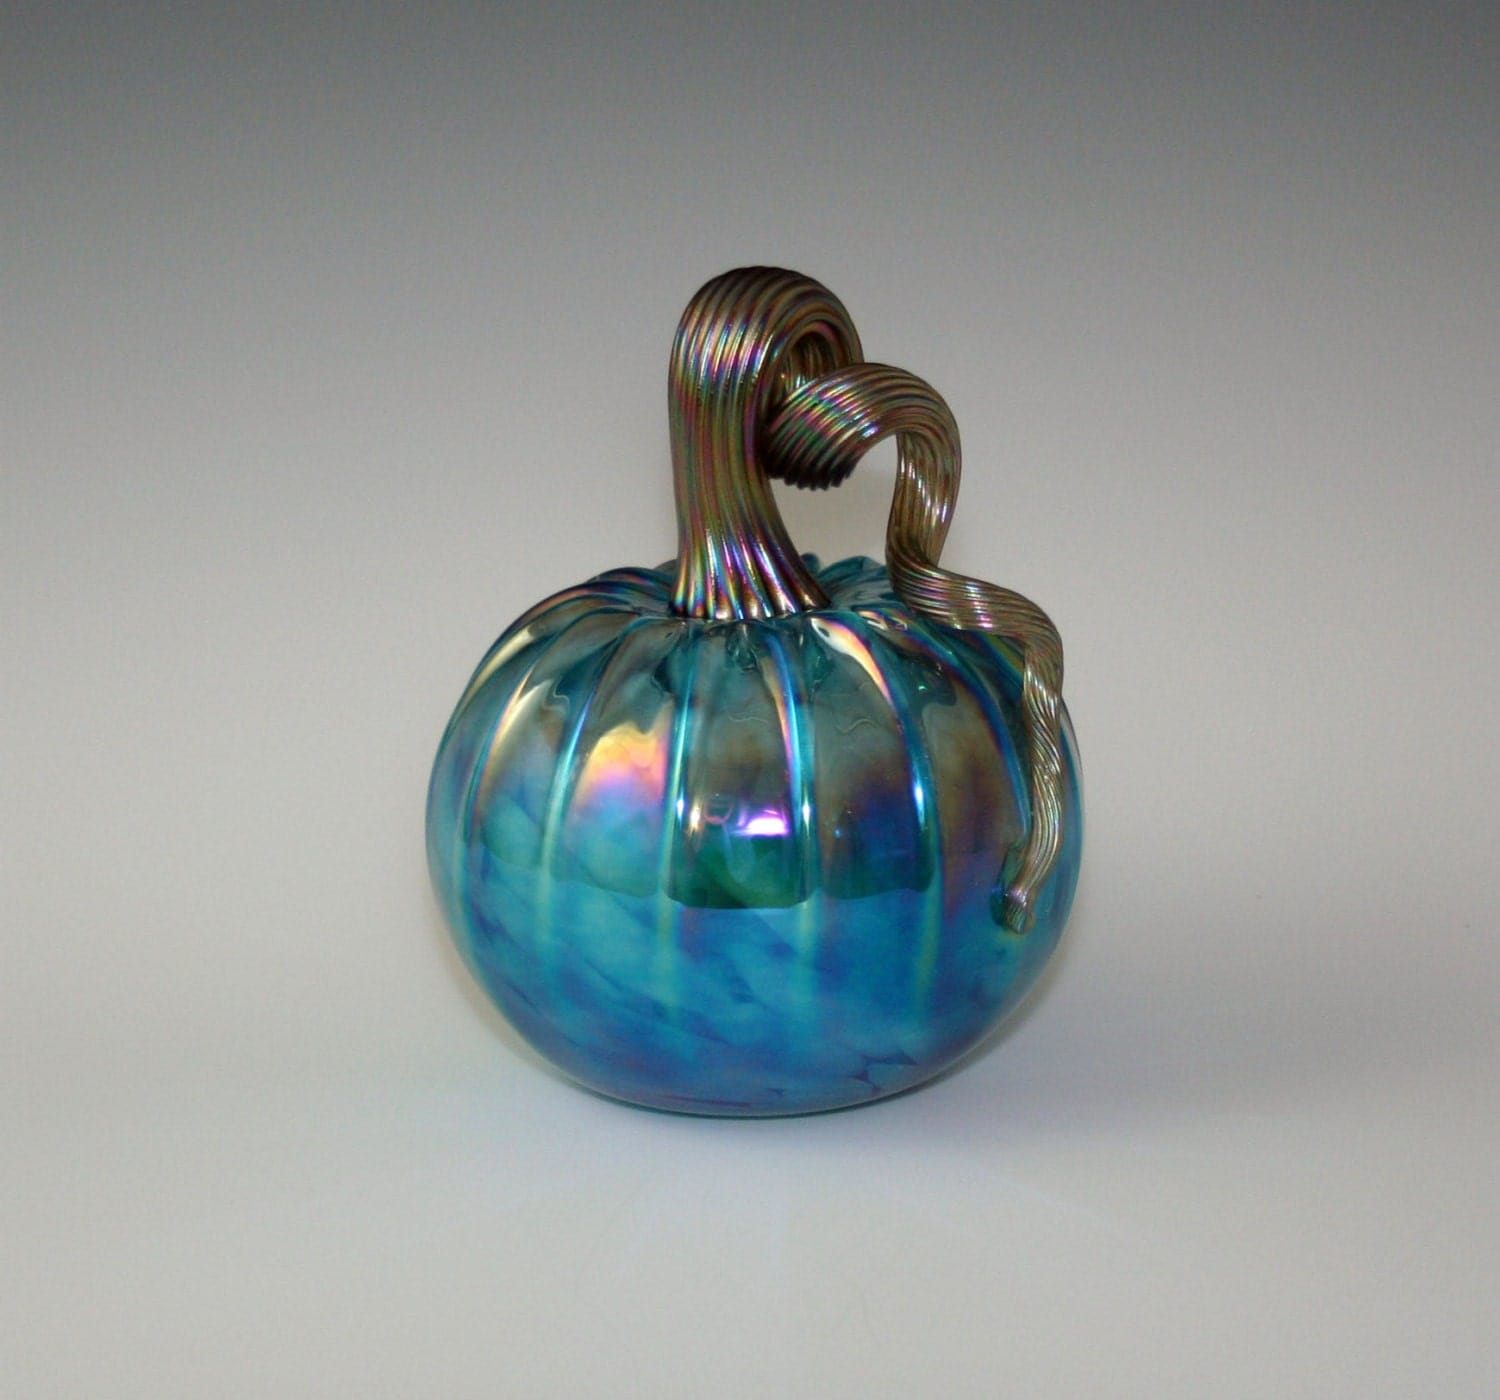 Hand Blown Glass Pumpkin Teal Green over Mottled White with